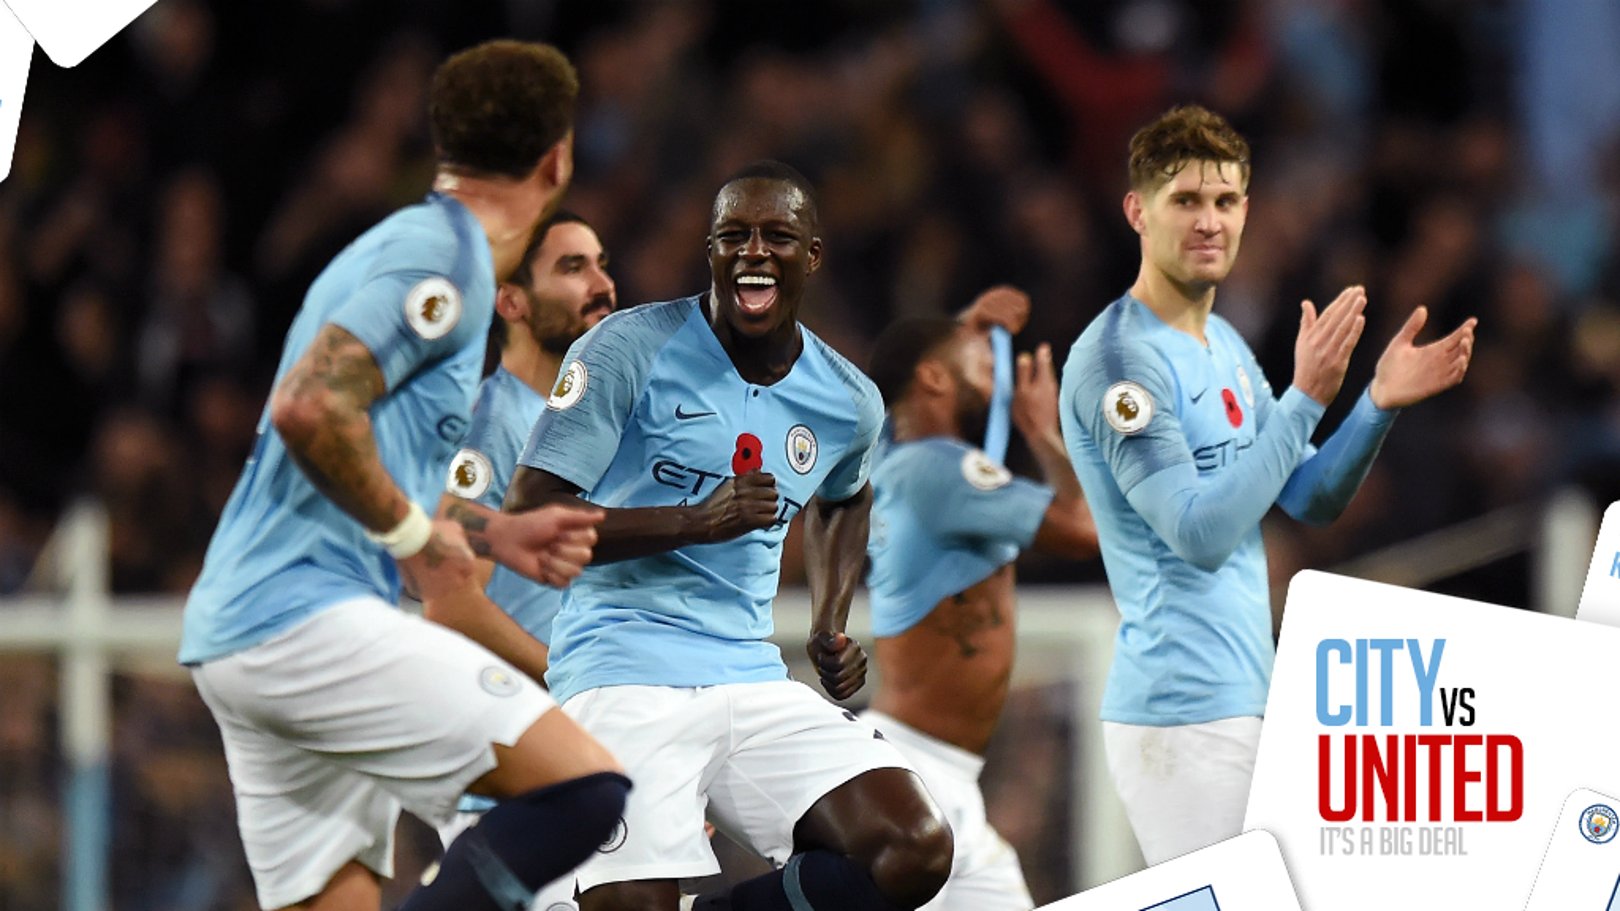 City 3-1 United: How the world reacted